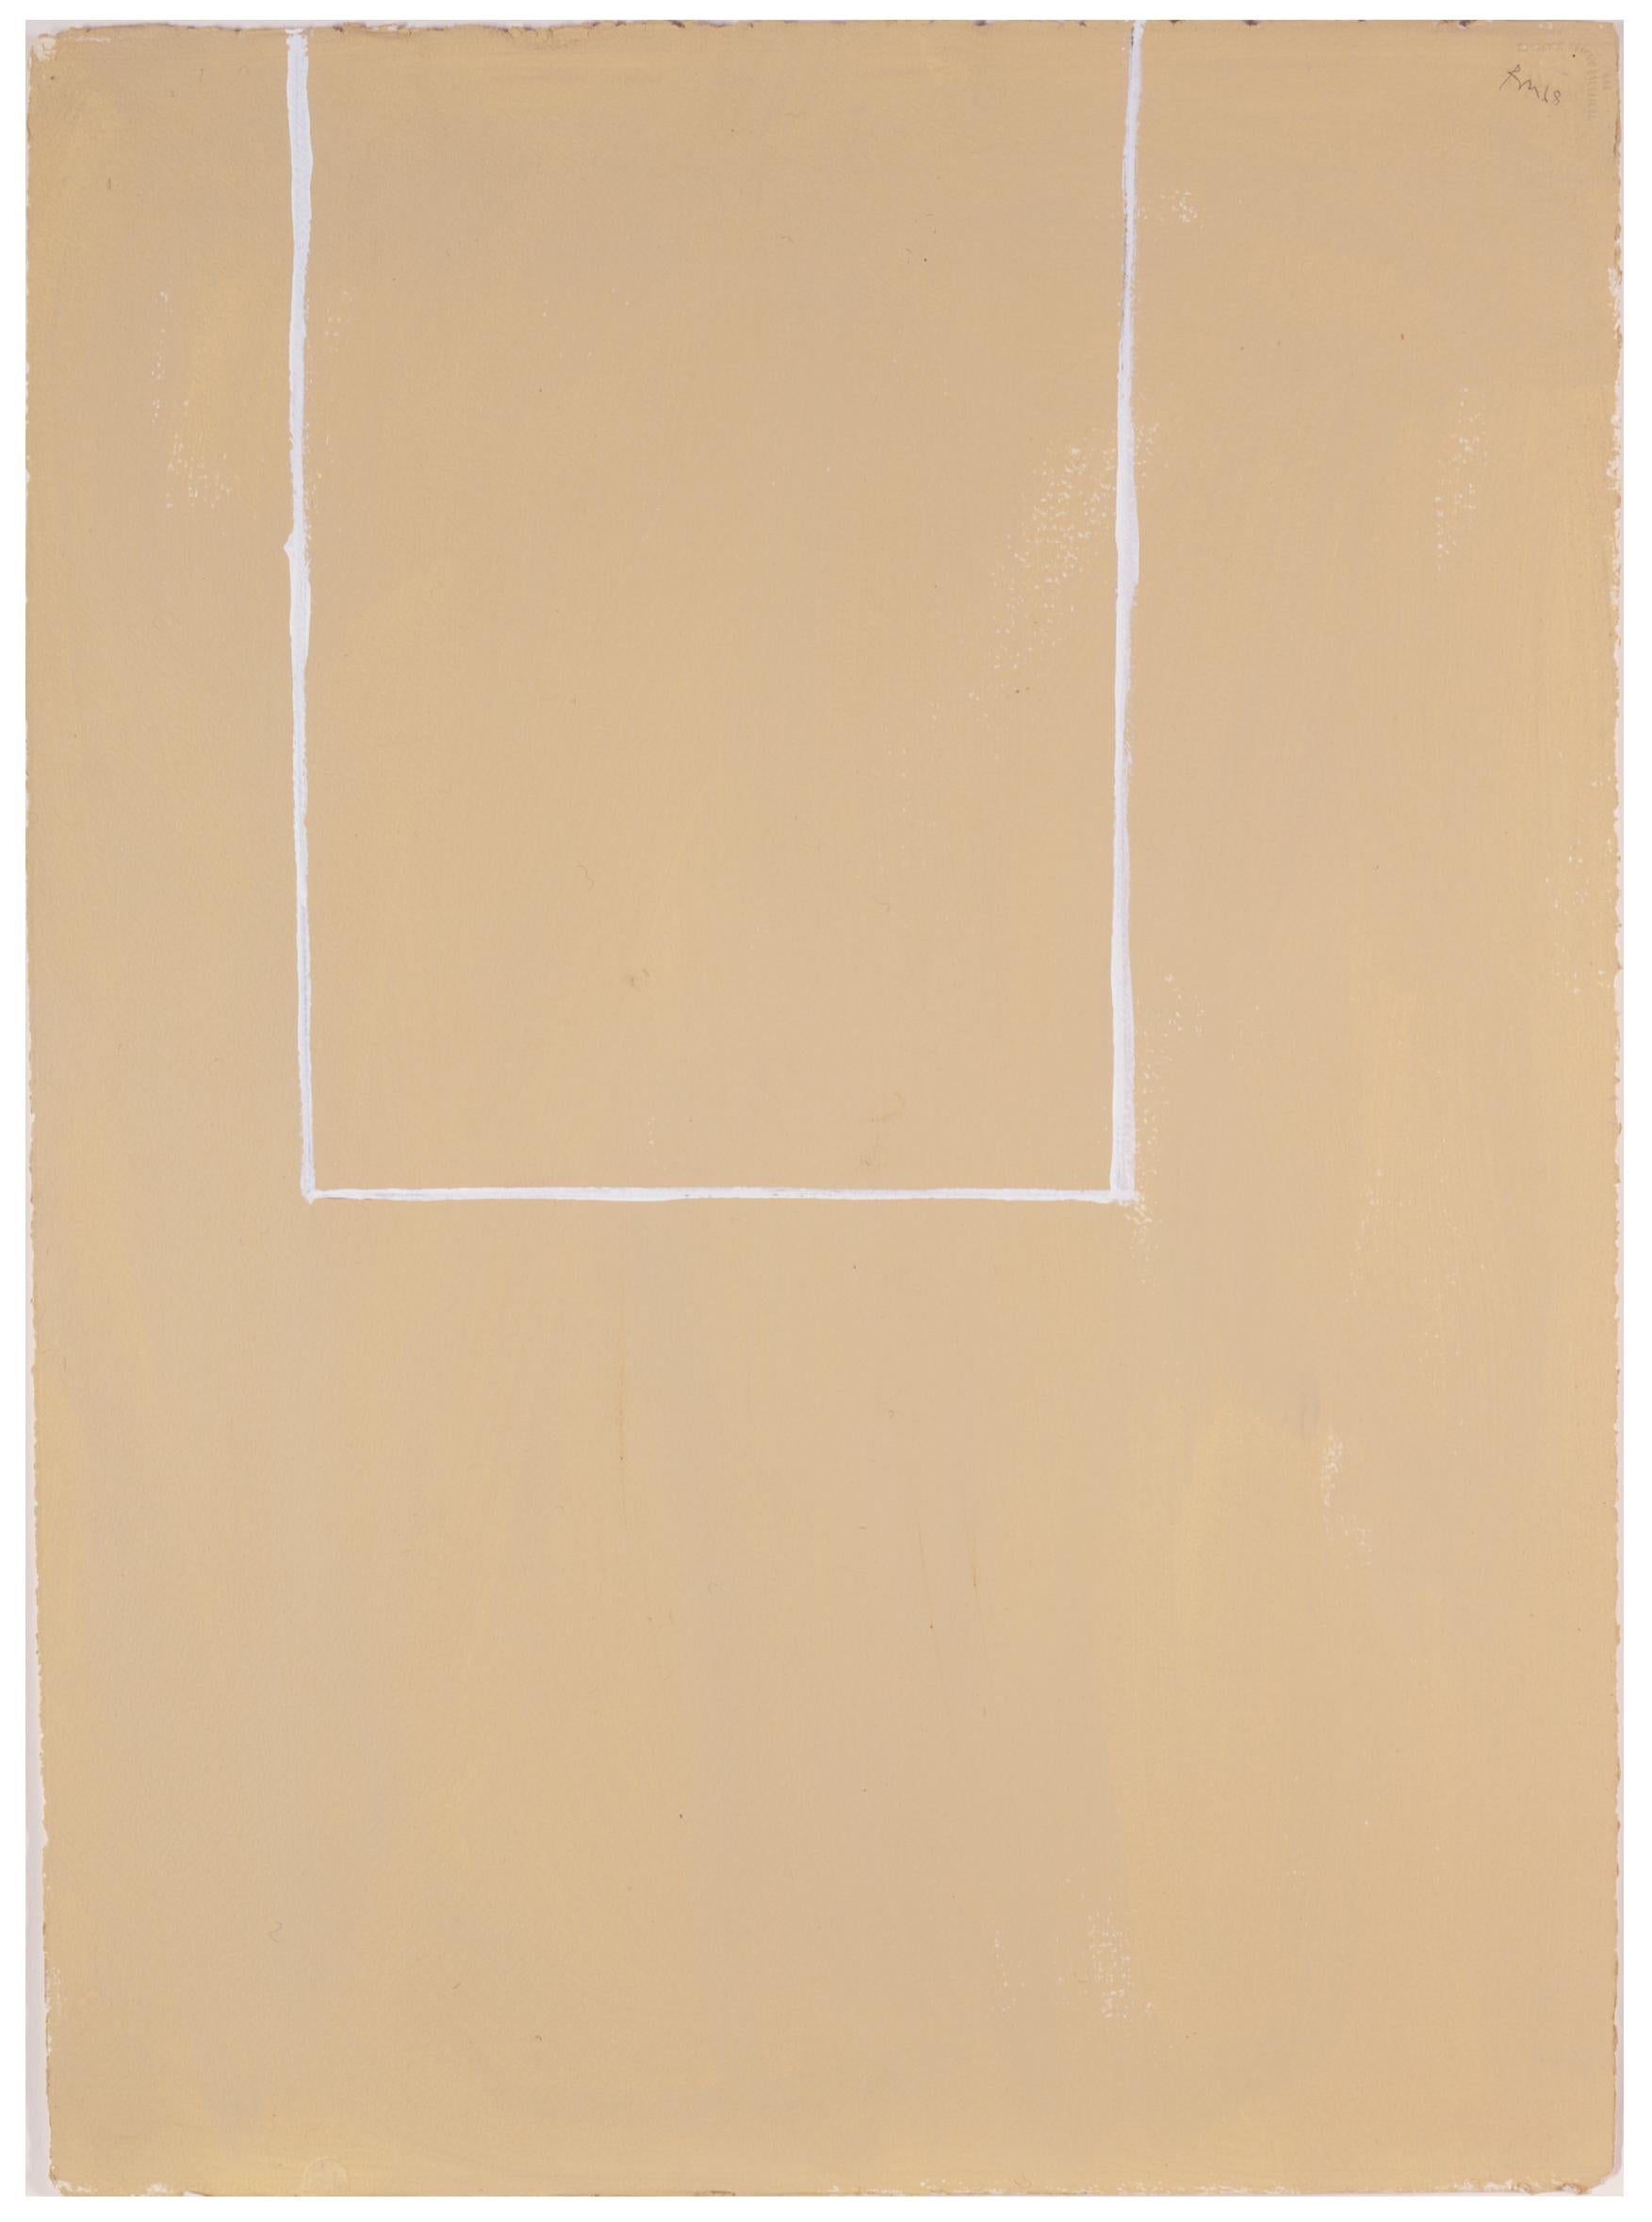 Abstract Painting Robert Motherwell - Étude ouverte (Line blanche sur beige n° 2)